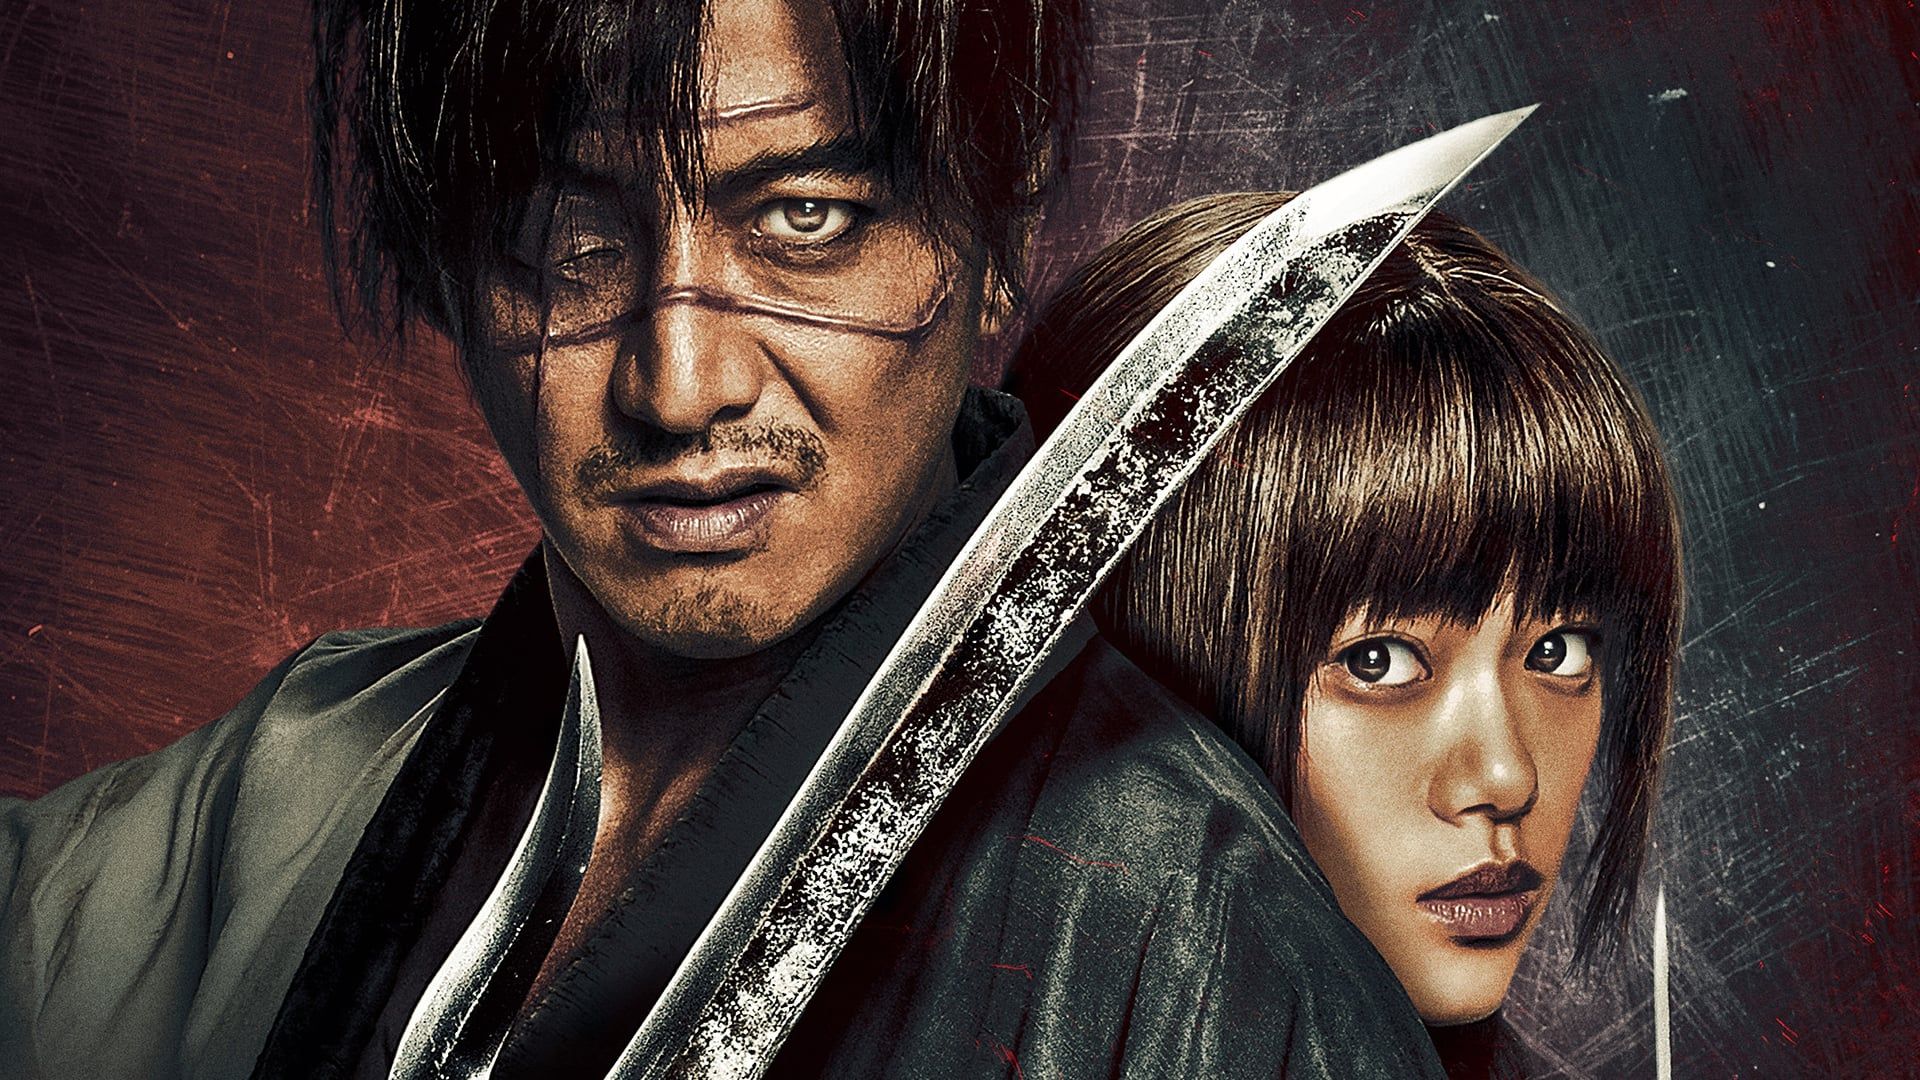 Blade of the Immortal background